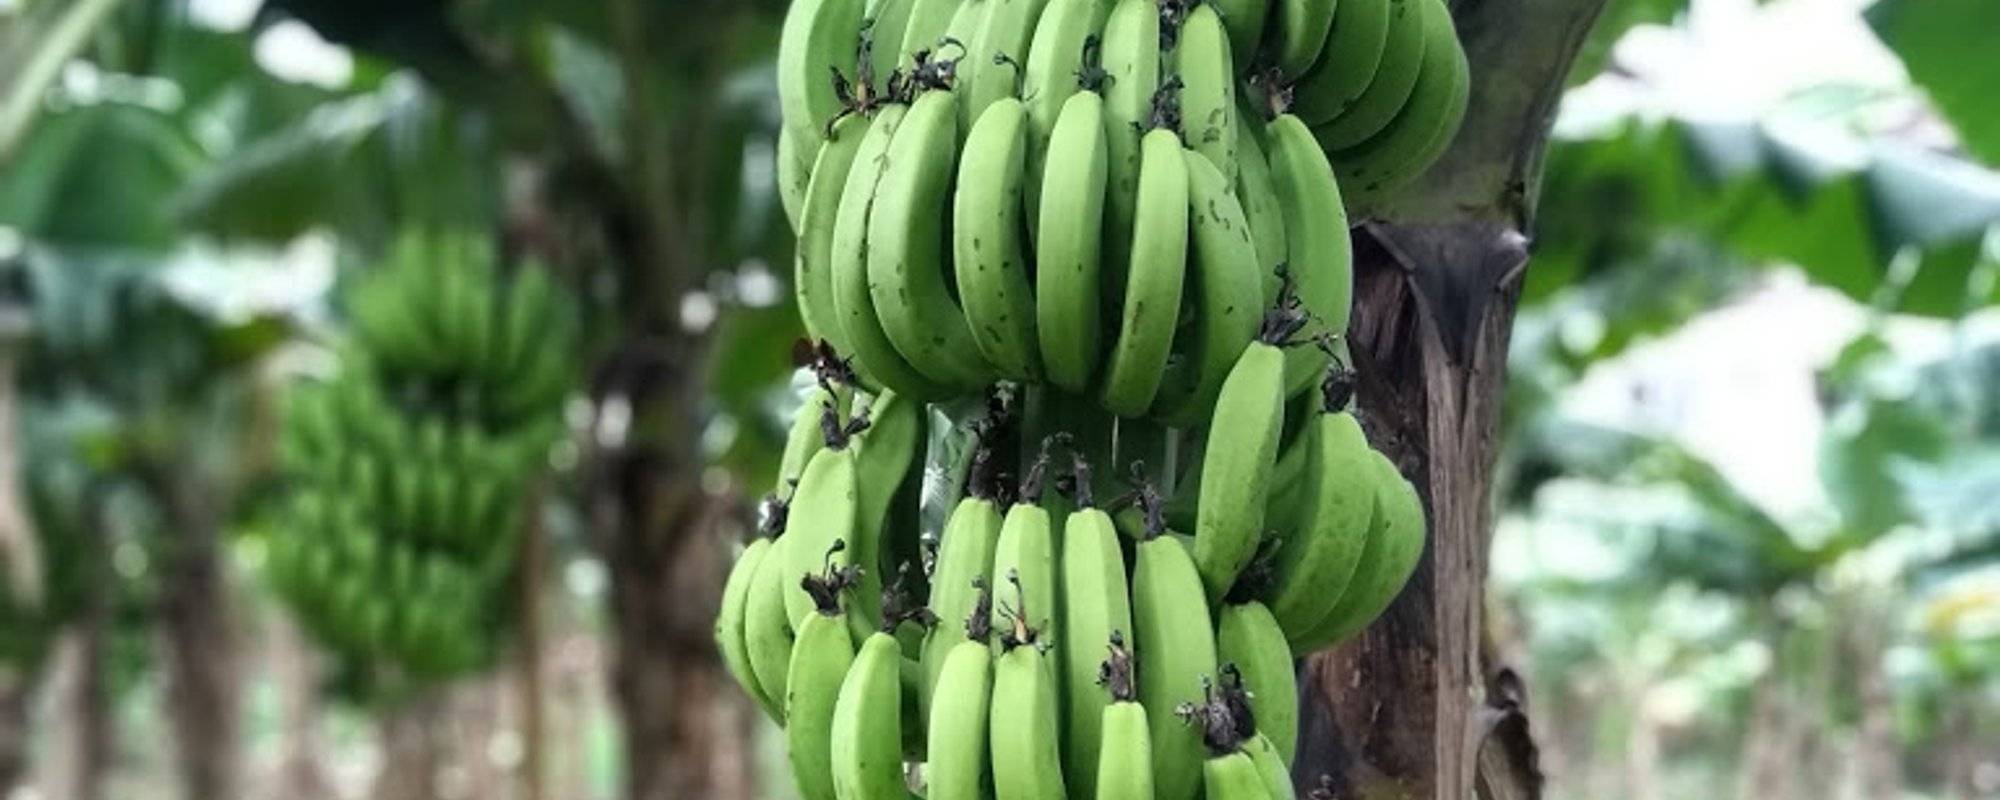 One Day on Raw Banana Garden | Know the nutritional qualities of raw bananas